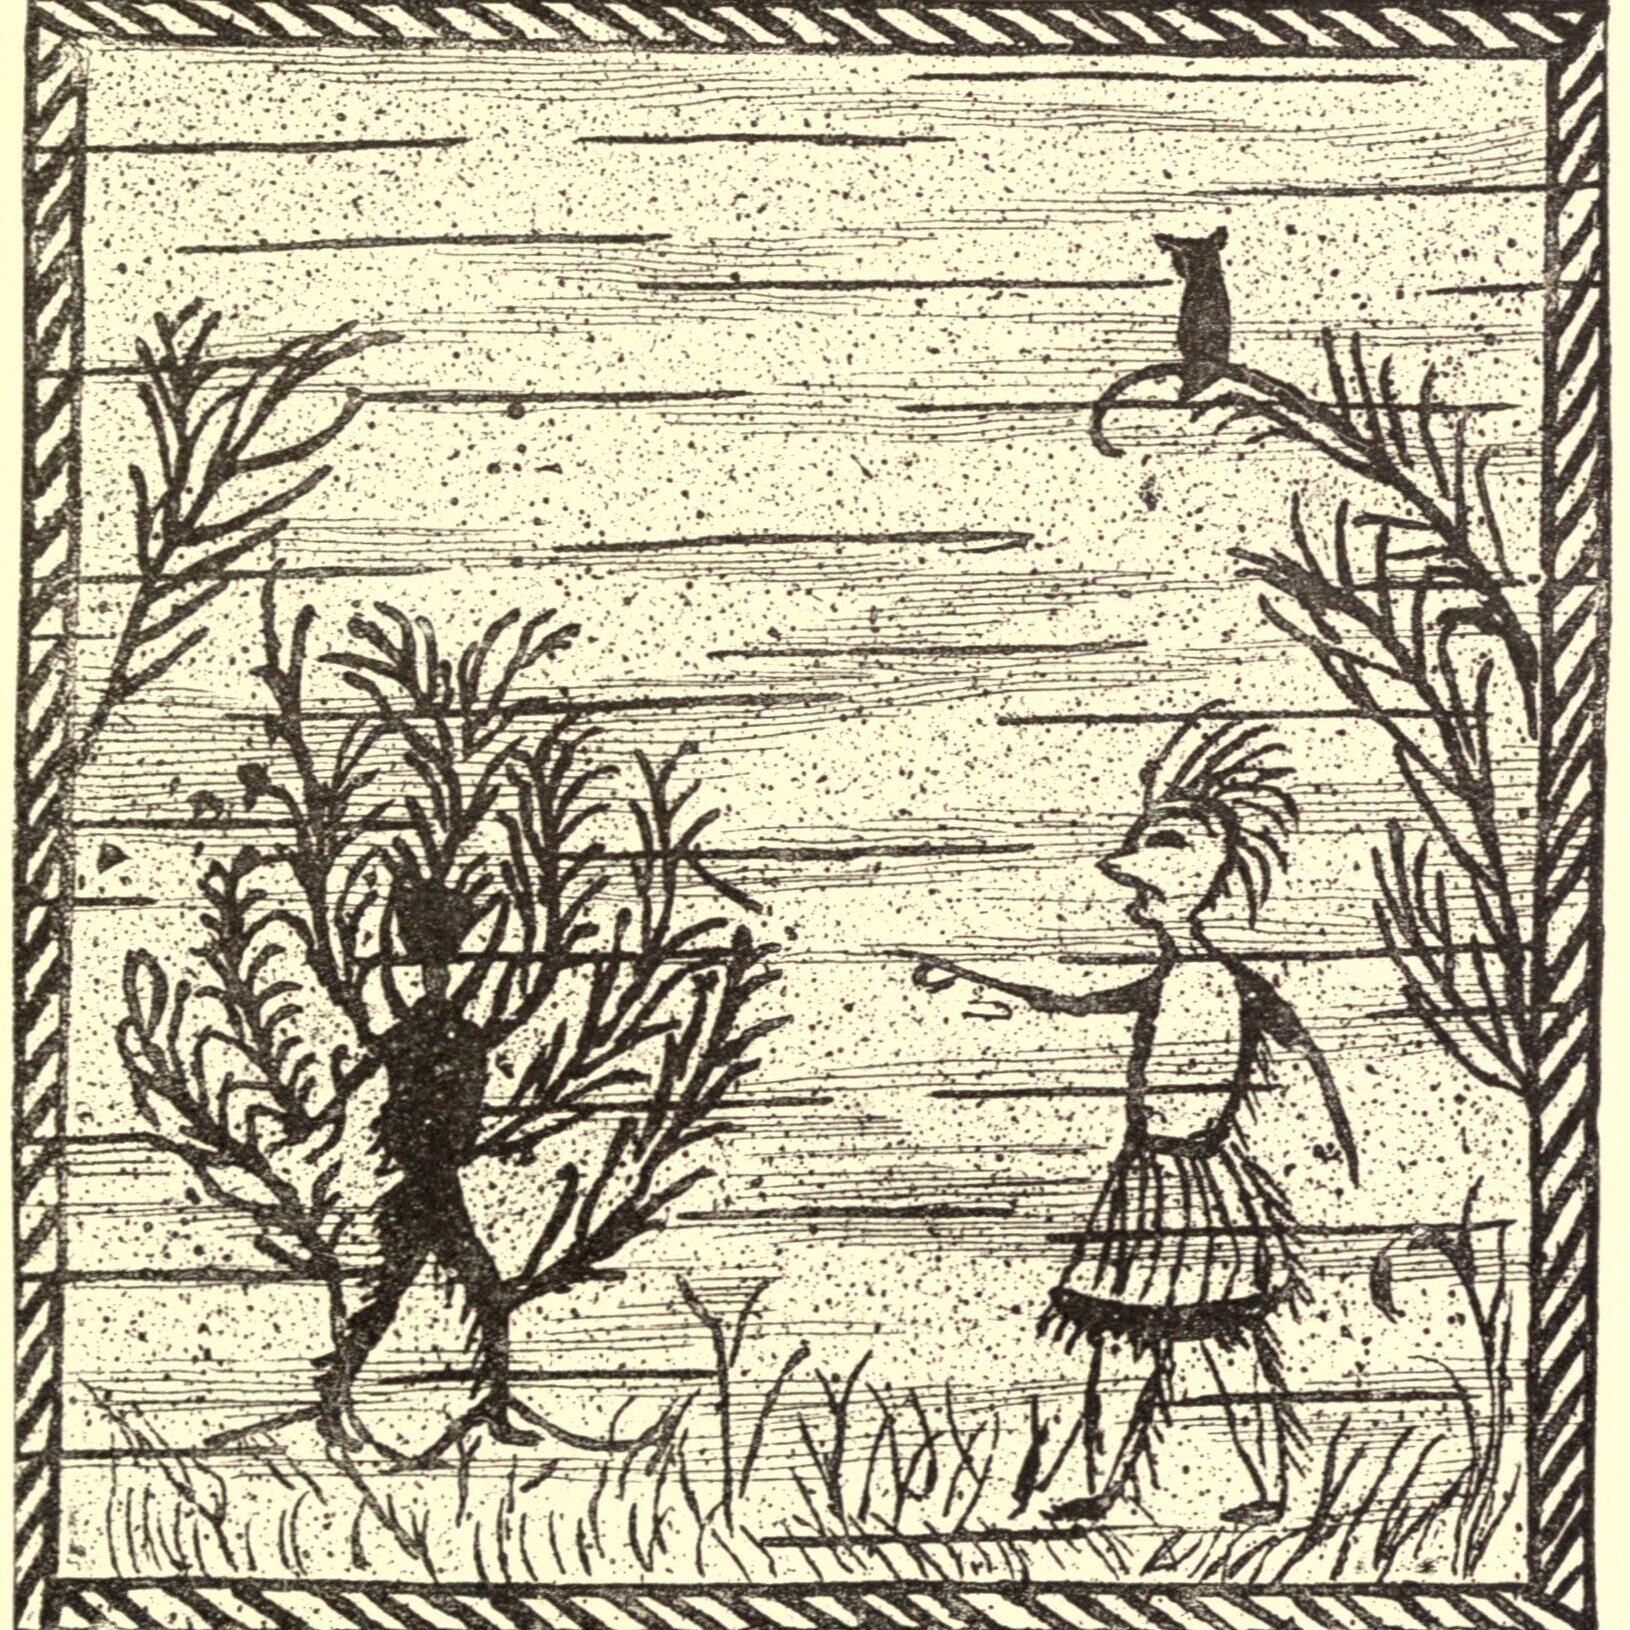 drawing of a man made of branches and a Native American deity